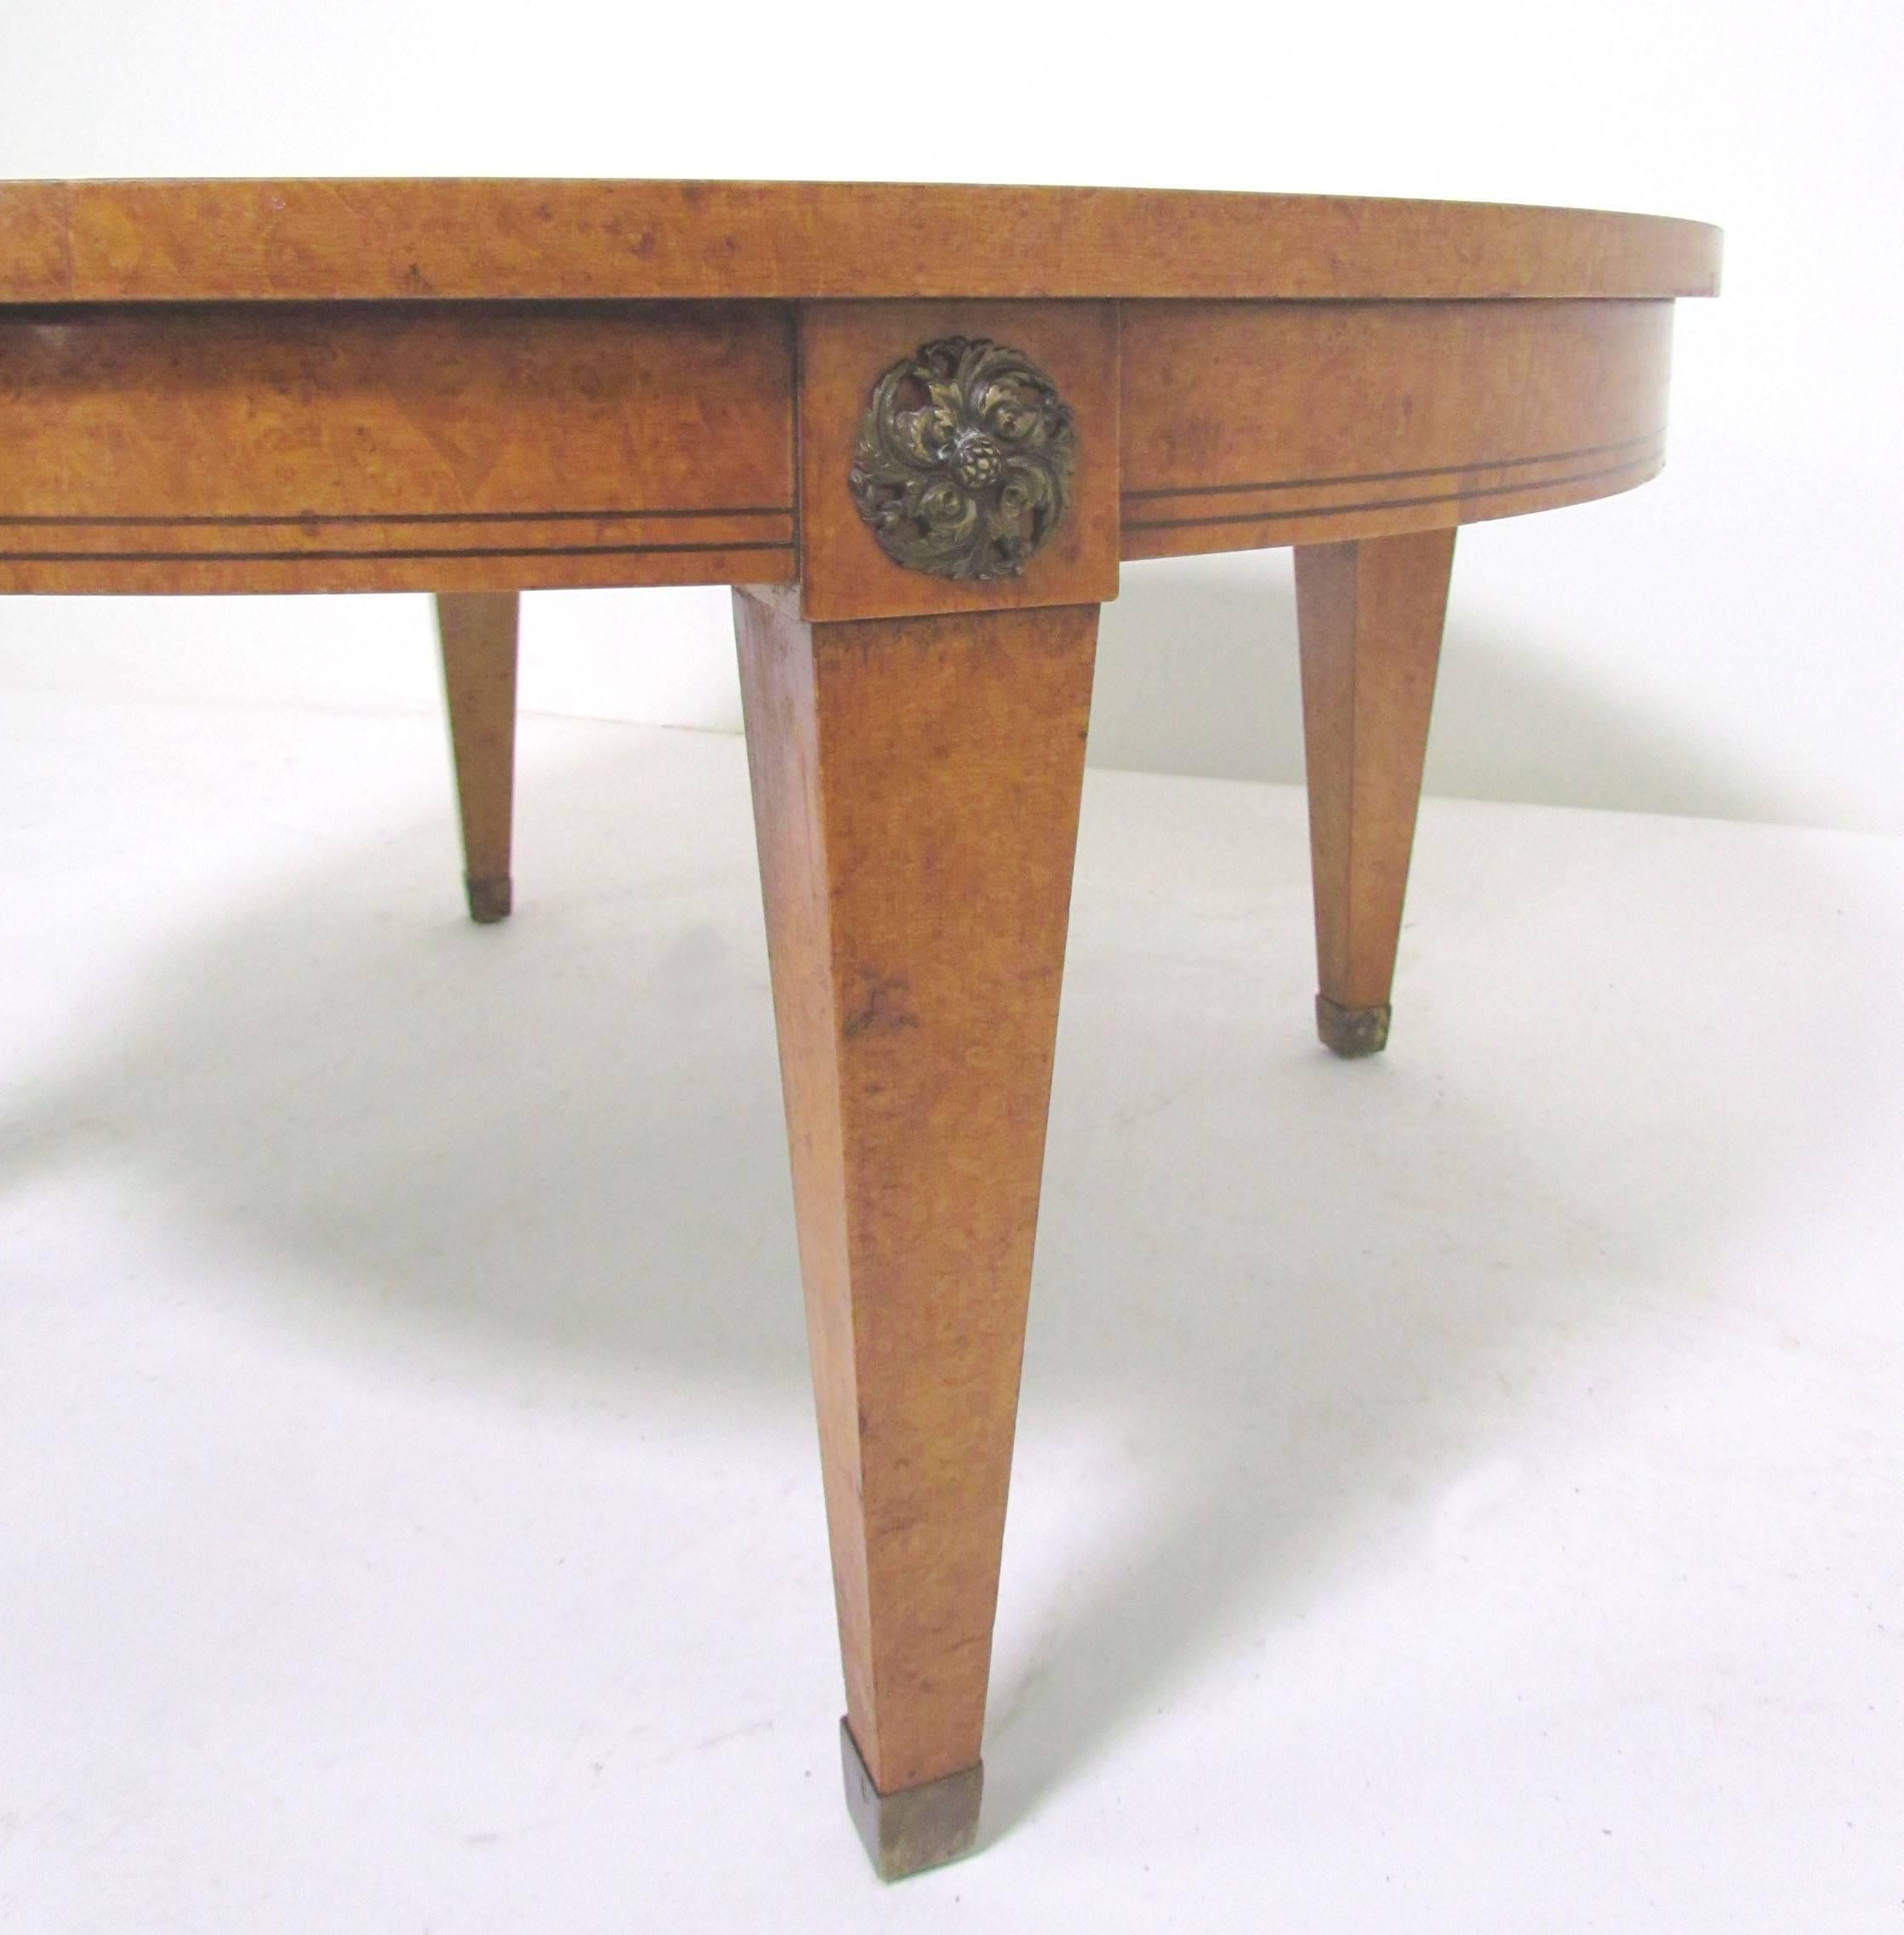 American Mid-Century Neoclassical Coffee Table by Charak, Dated 1952